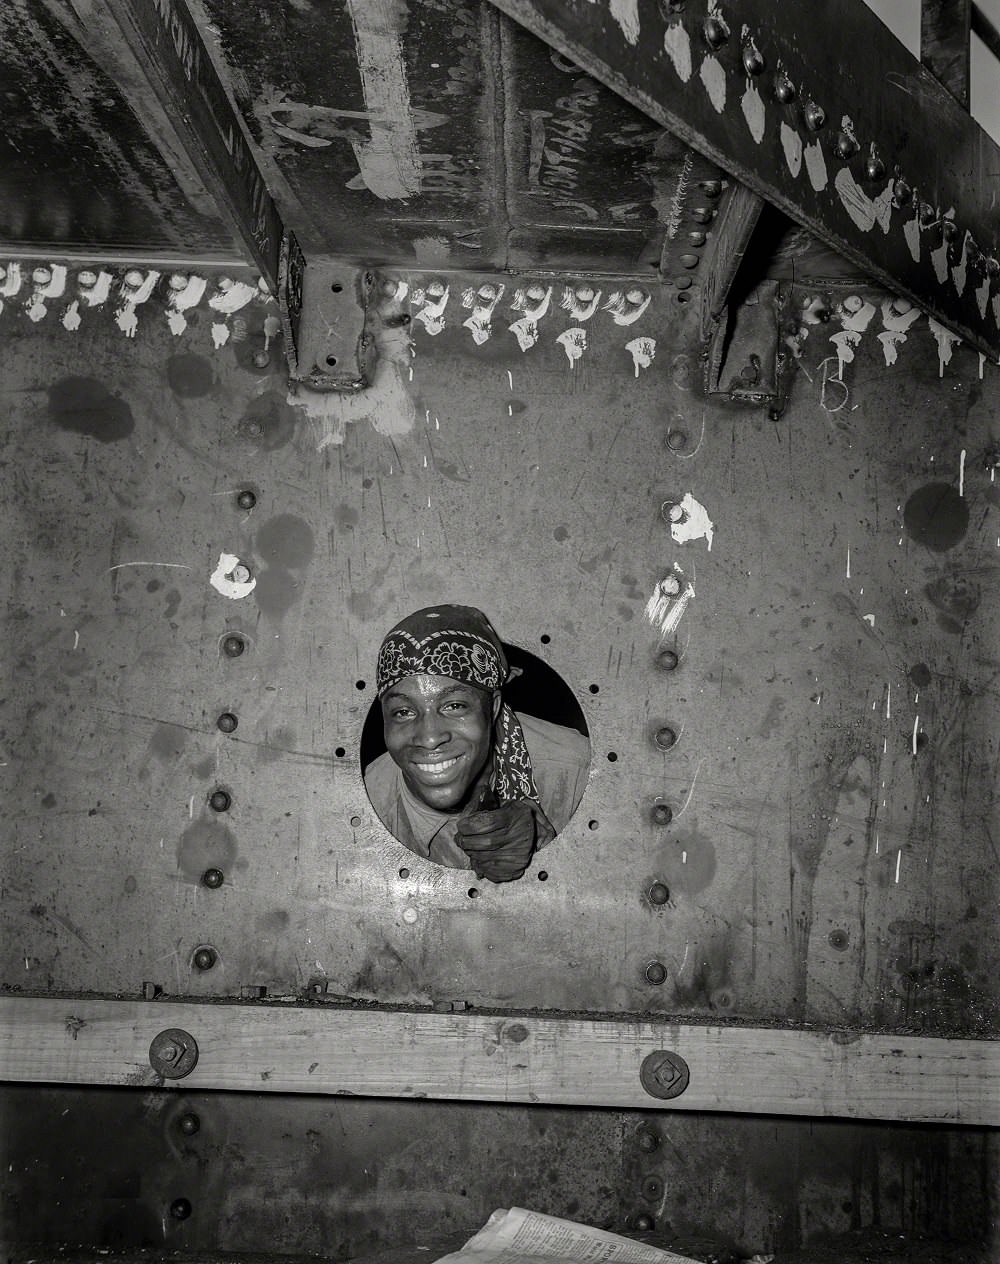 A worker at the Bethlehem-Fairfield shipyards, Baltimore, May 1943